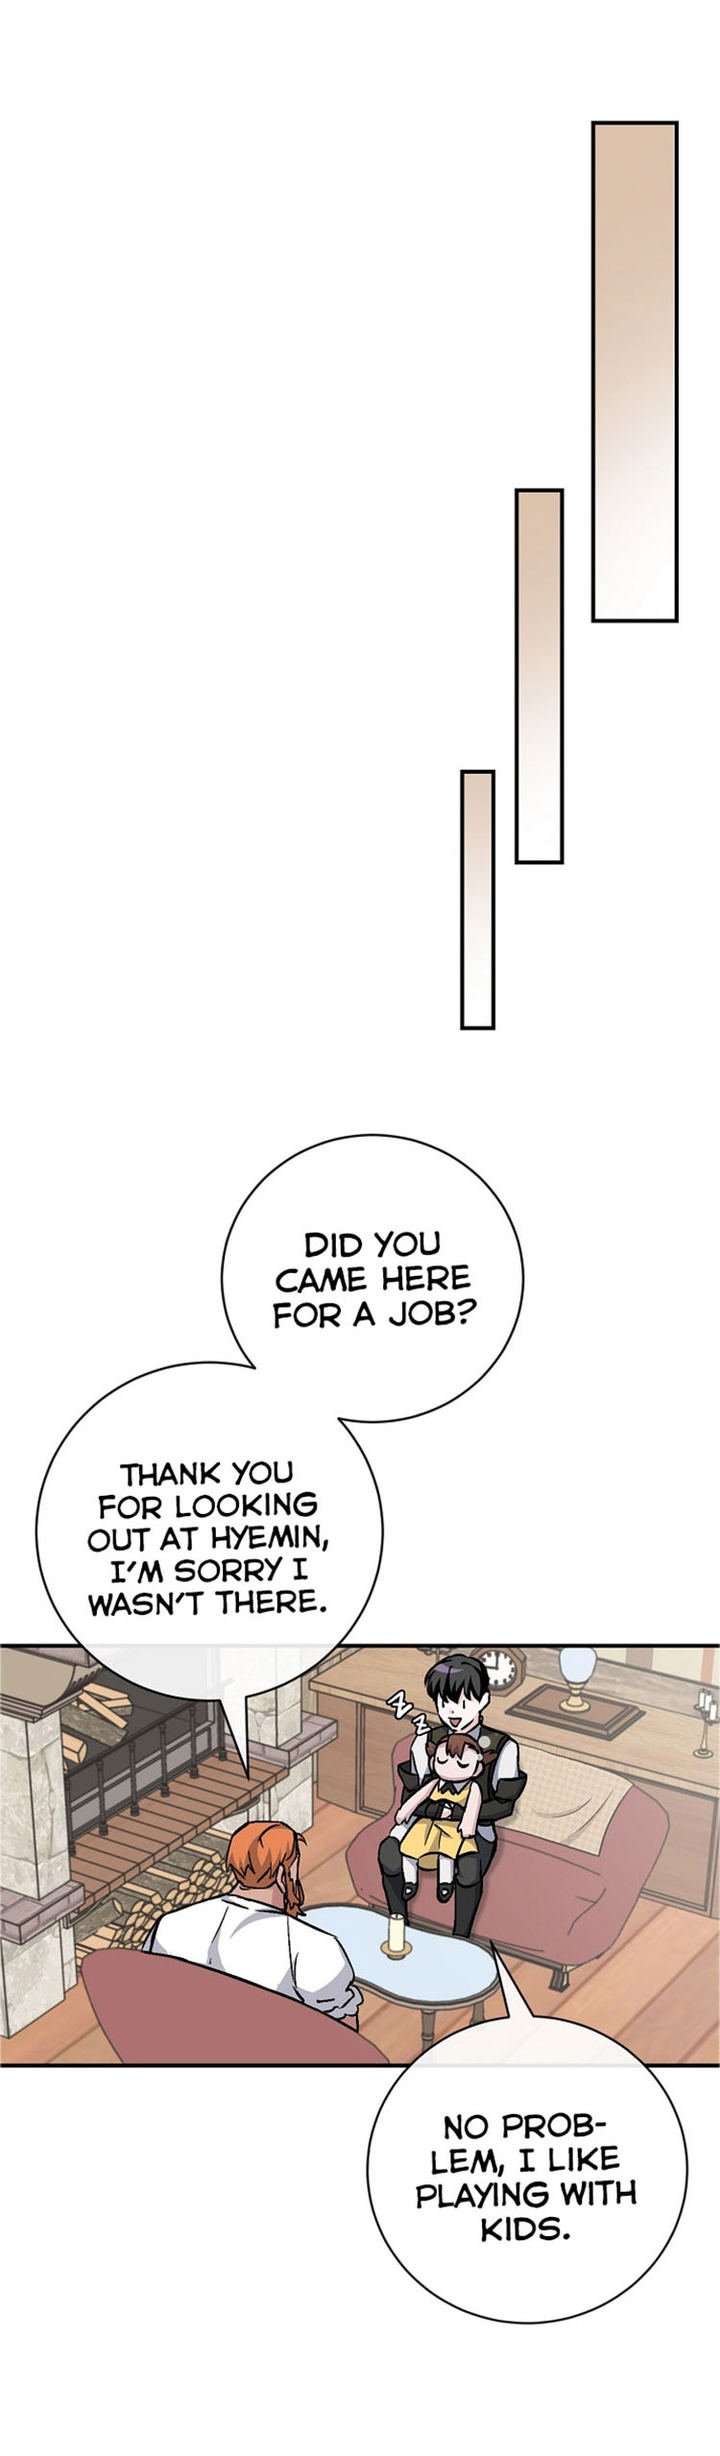 leveling-up-by-only-eating-chap-32-27